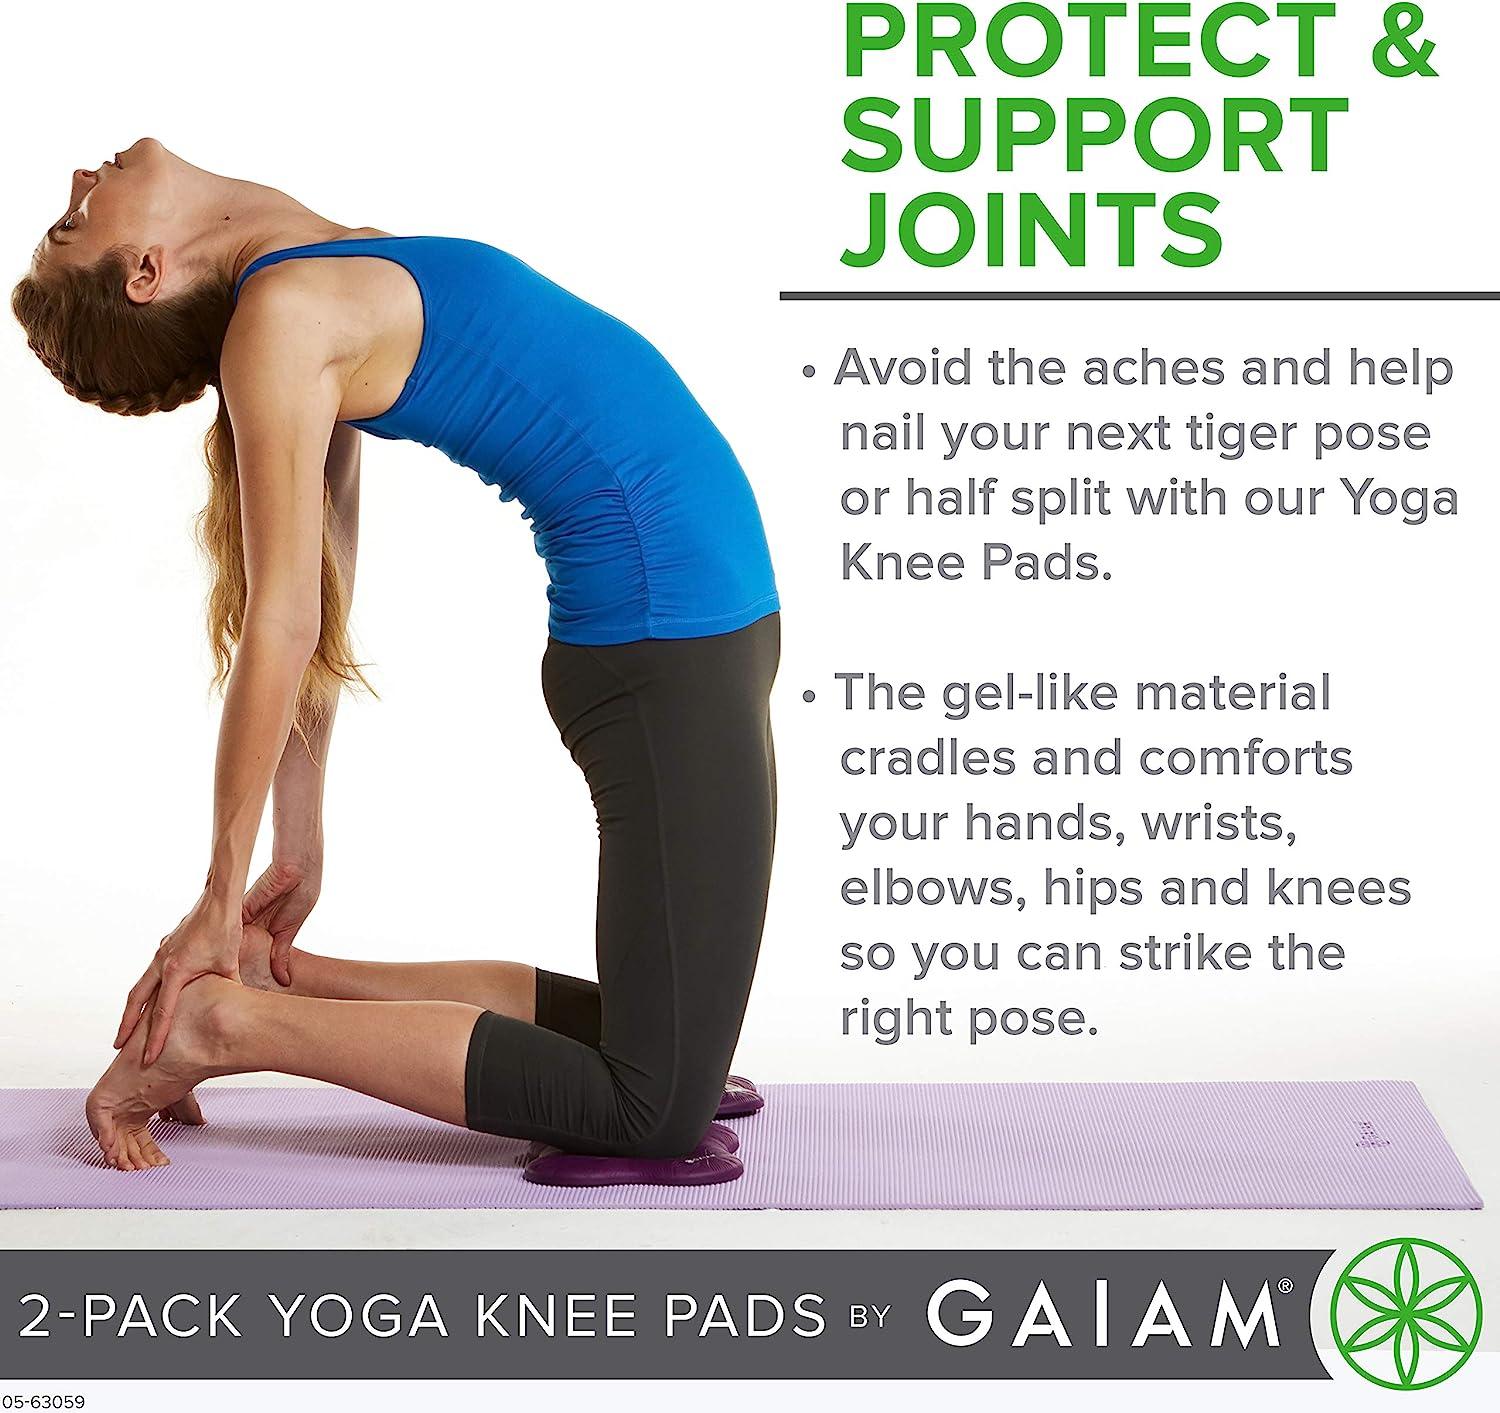 Gaiam Yoga Knee Pads (Set of 2) - Yoga Props and Accessories for